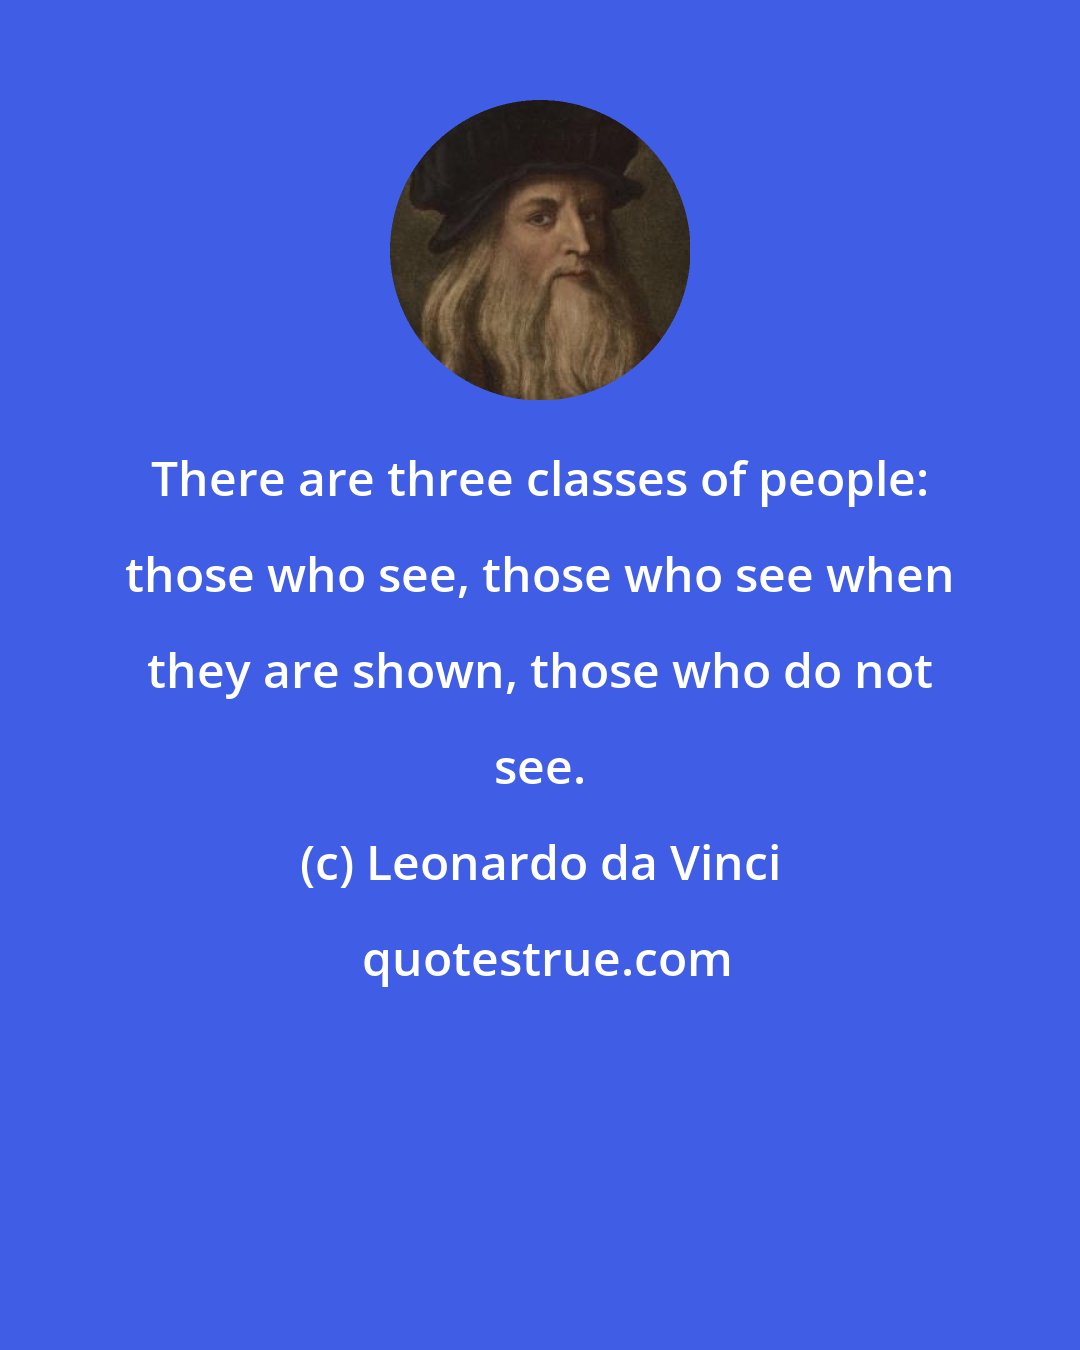 Leonardo da Vinci: There are three classes of people: those who see, those who see when they are shown, those who do not see.